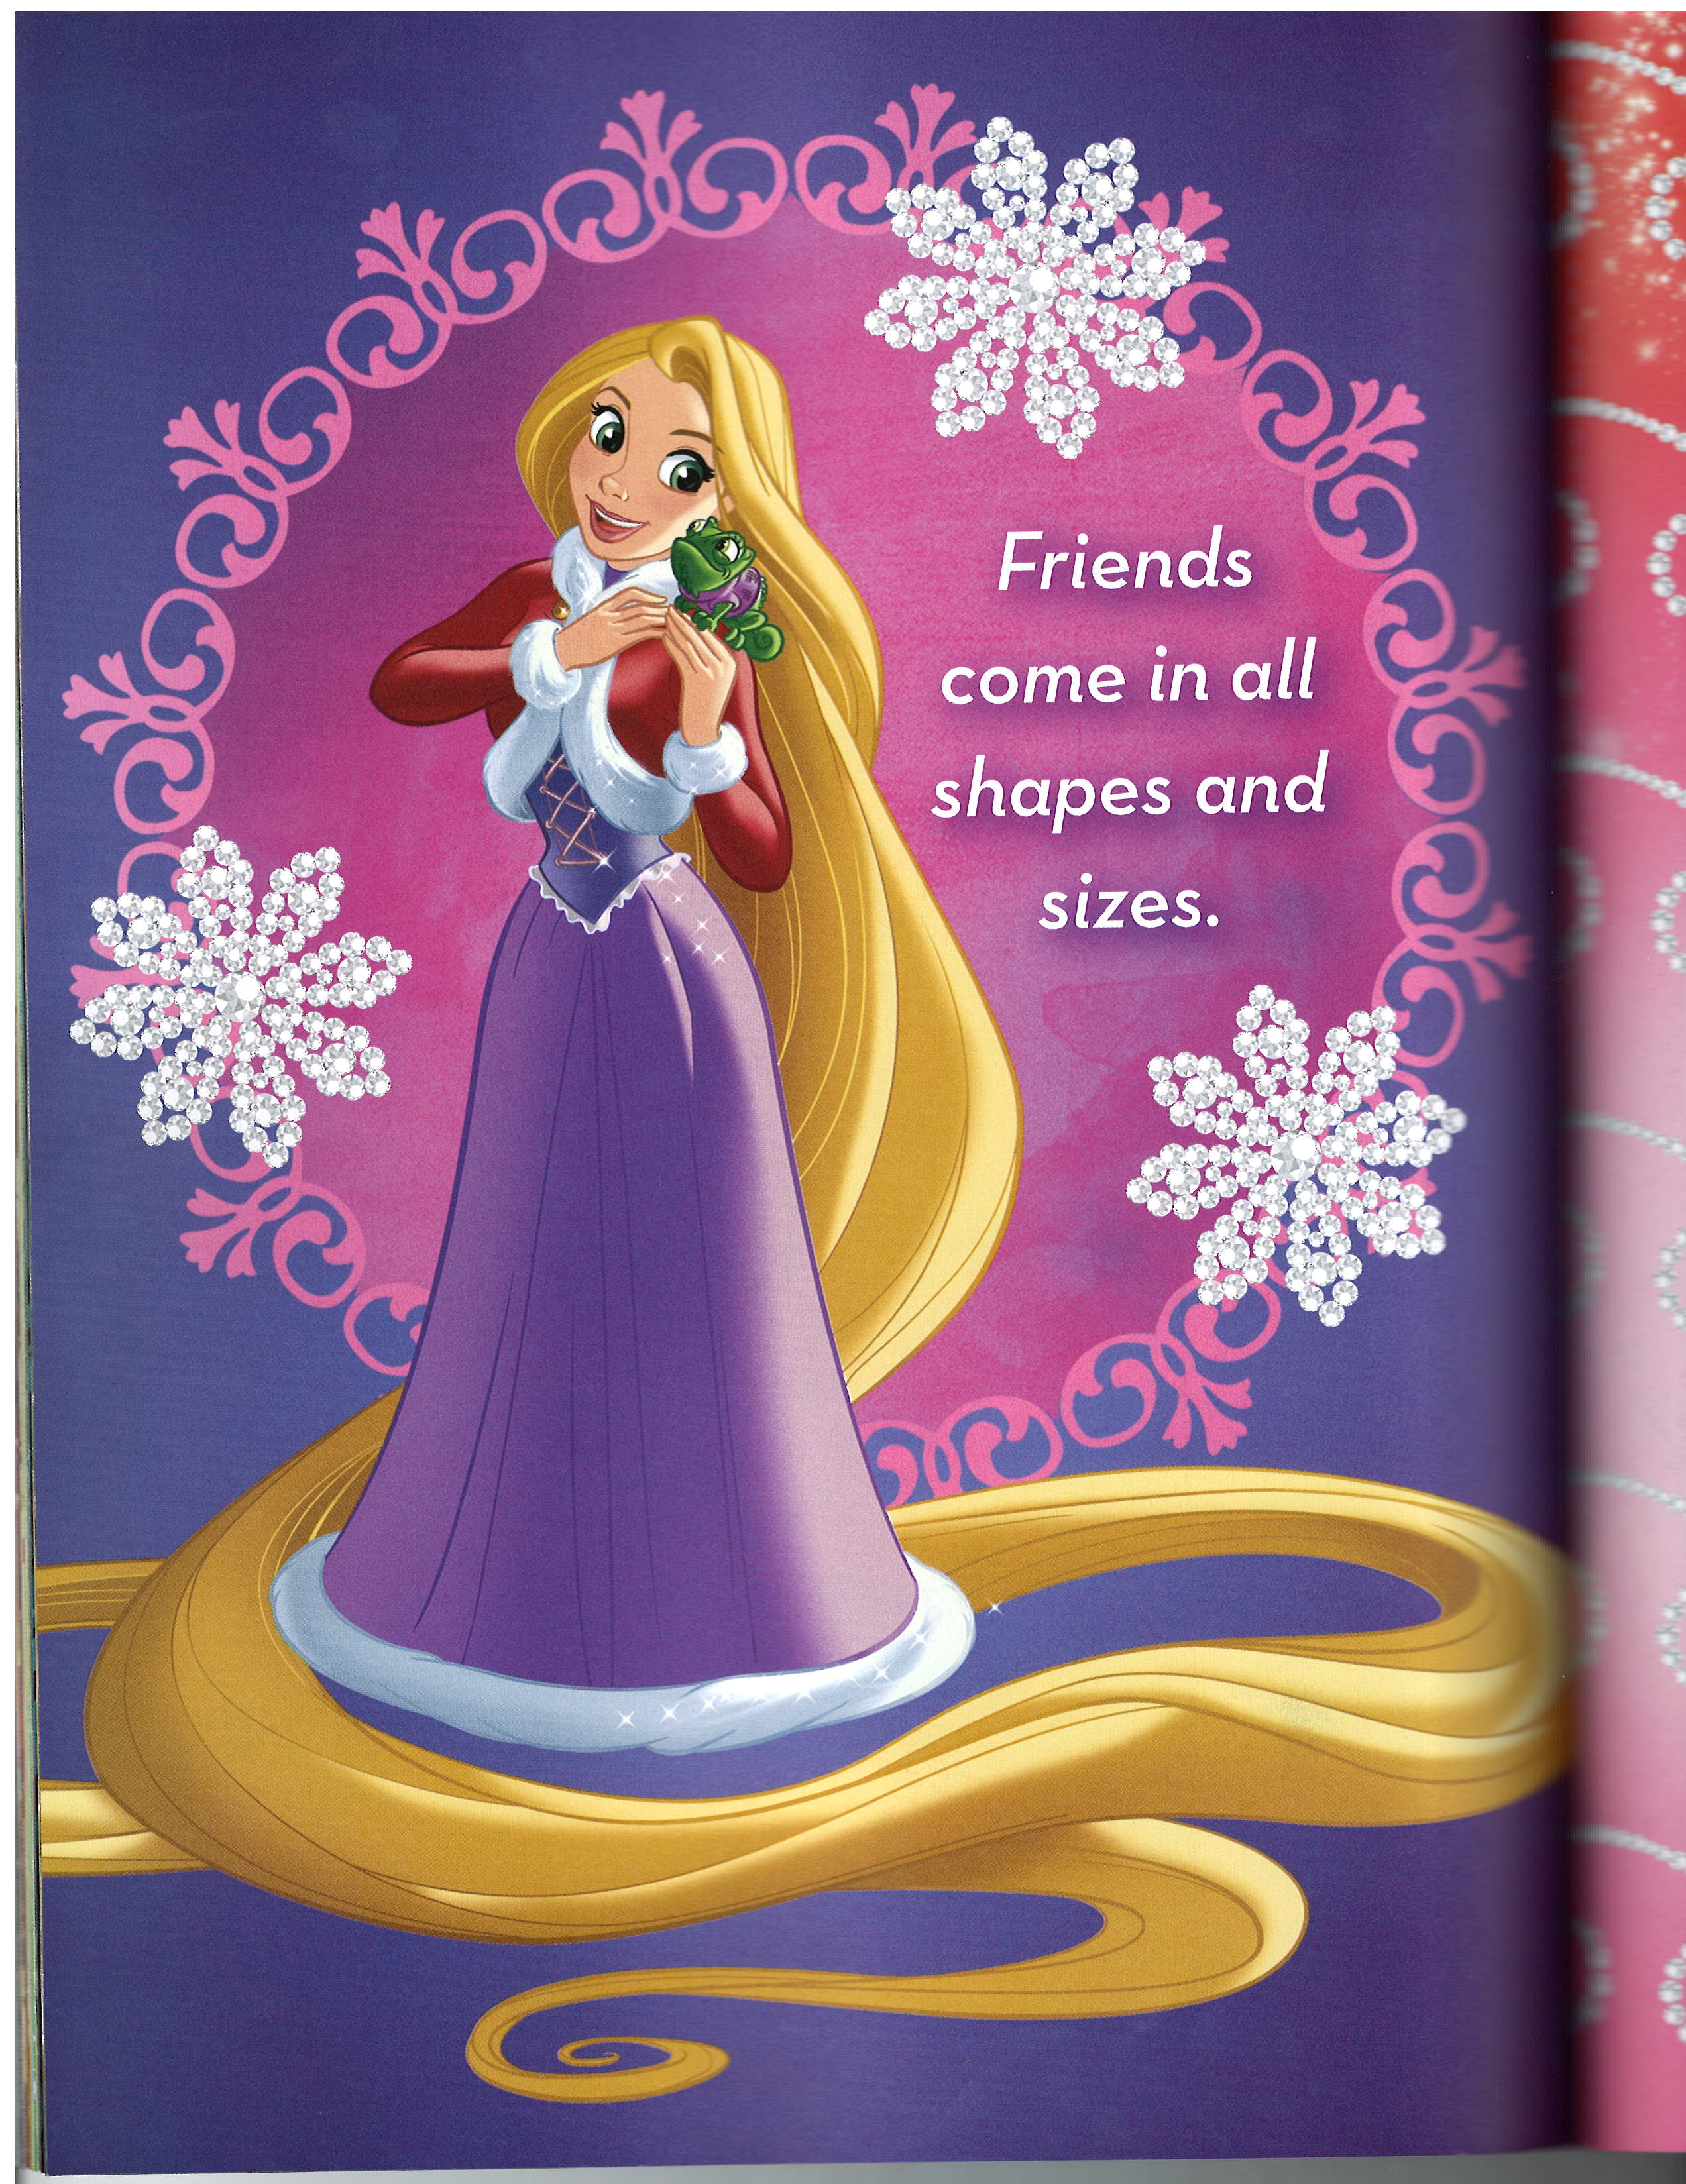 Fairy Tale Momments Poster Book - Disney Princess Photo (38334509) - Fanpop  - Page 40